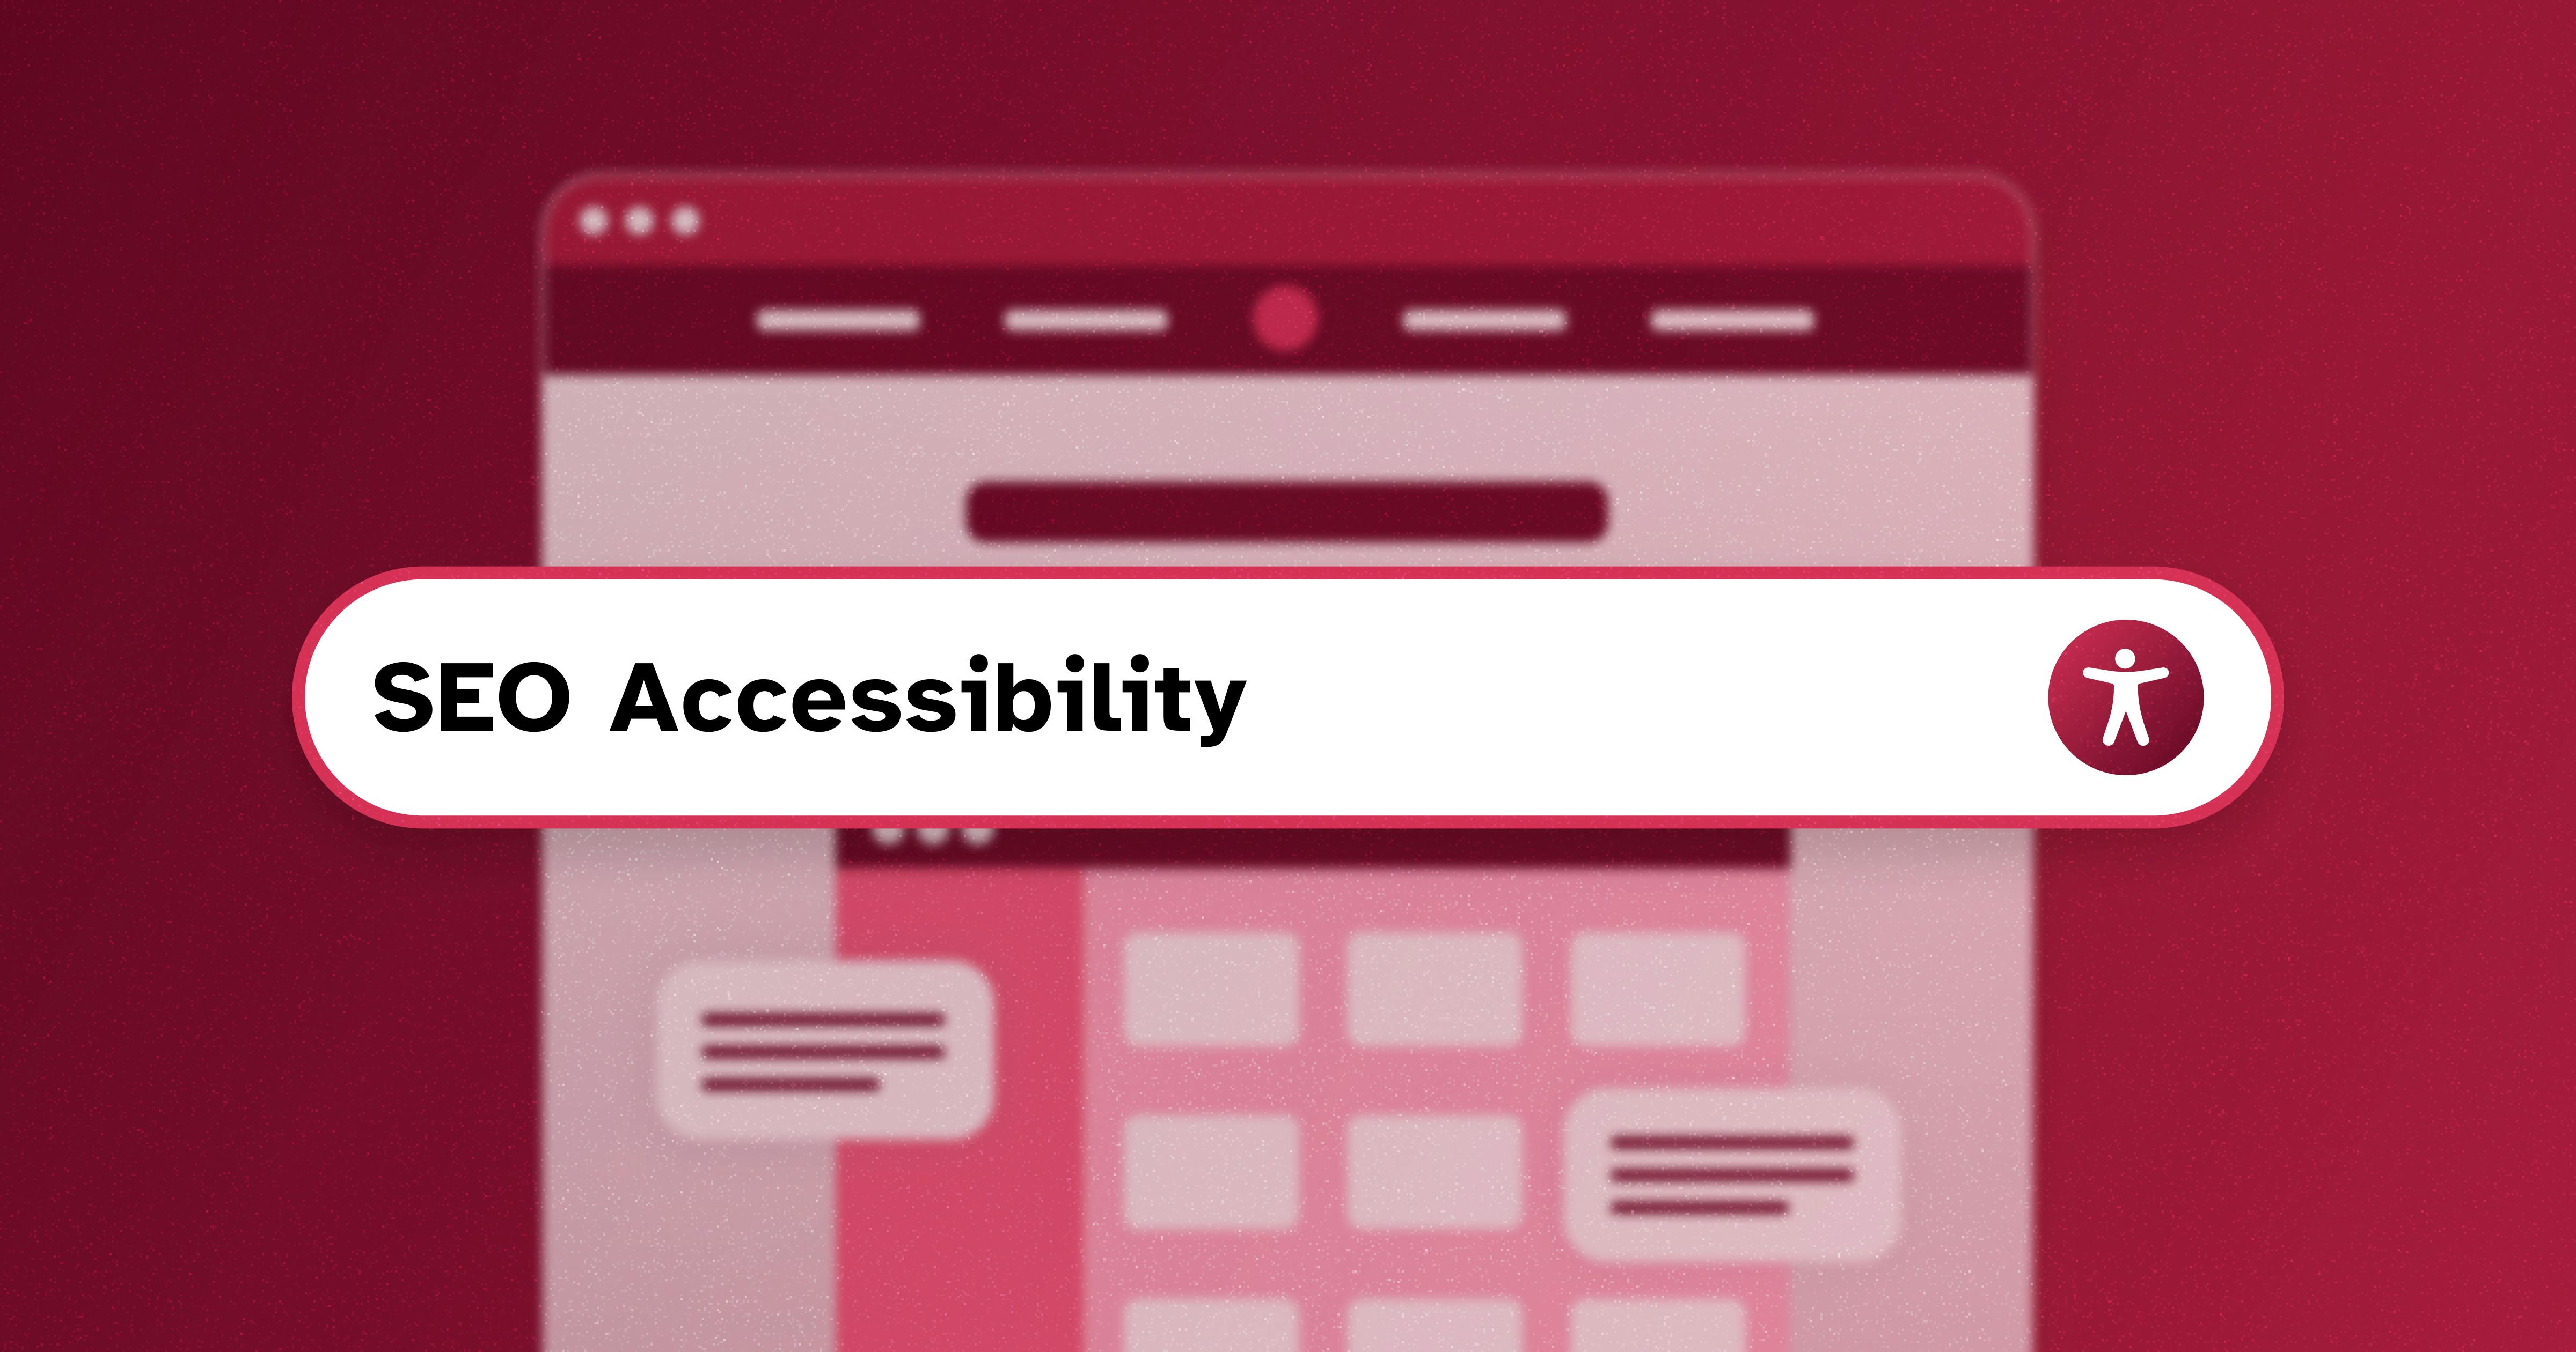 Stylized web browser with search bar pop up that reads 'SEO Accessibility'; the accessibility icon is on the right-hand side of the search bar.